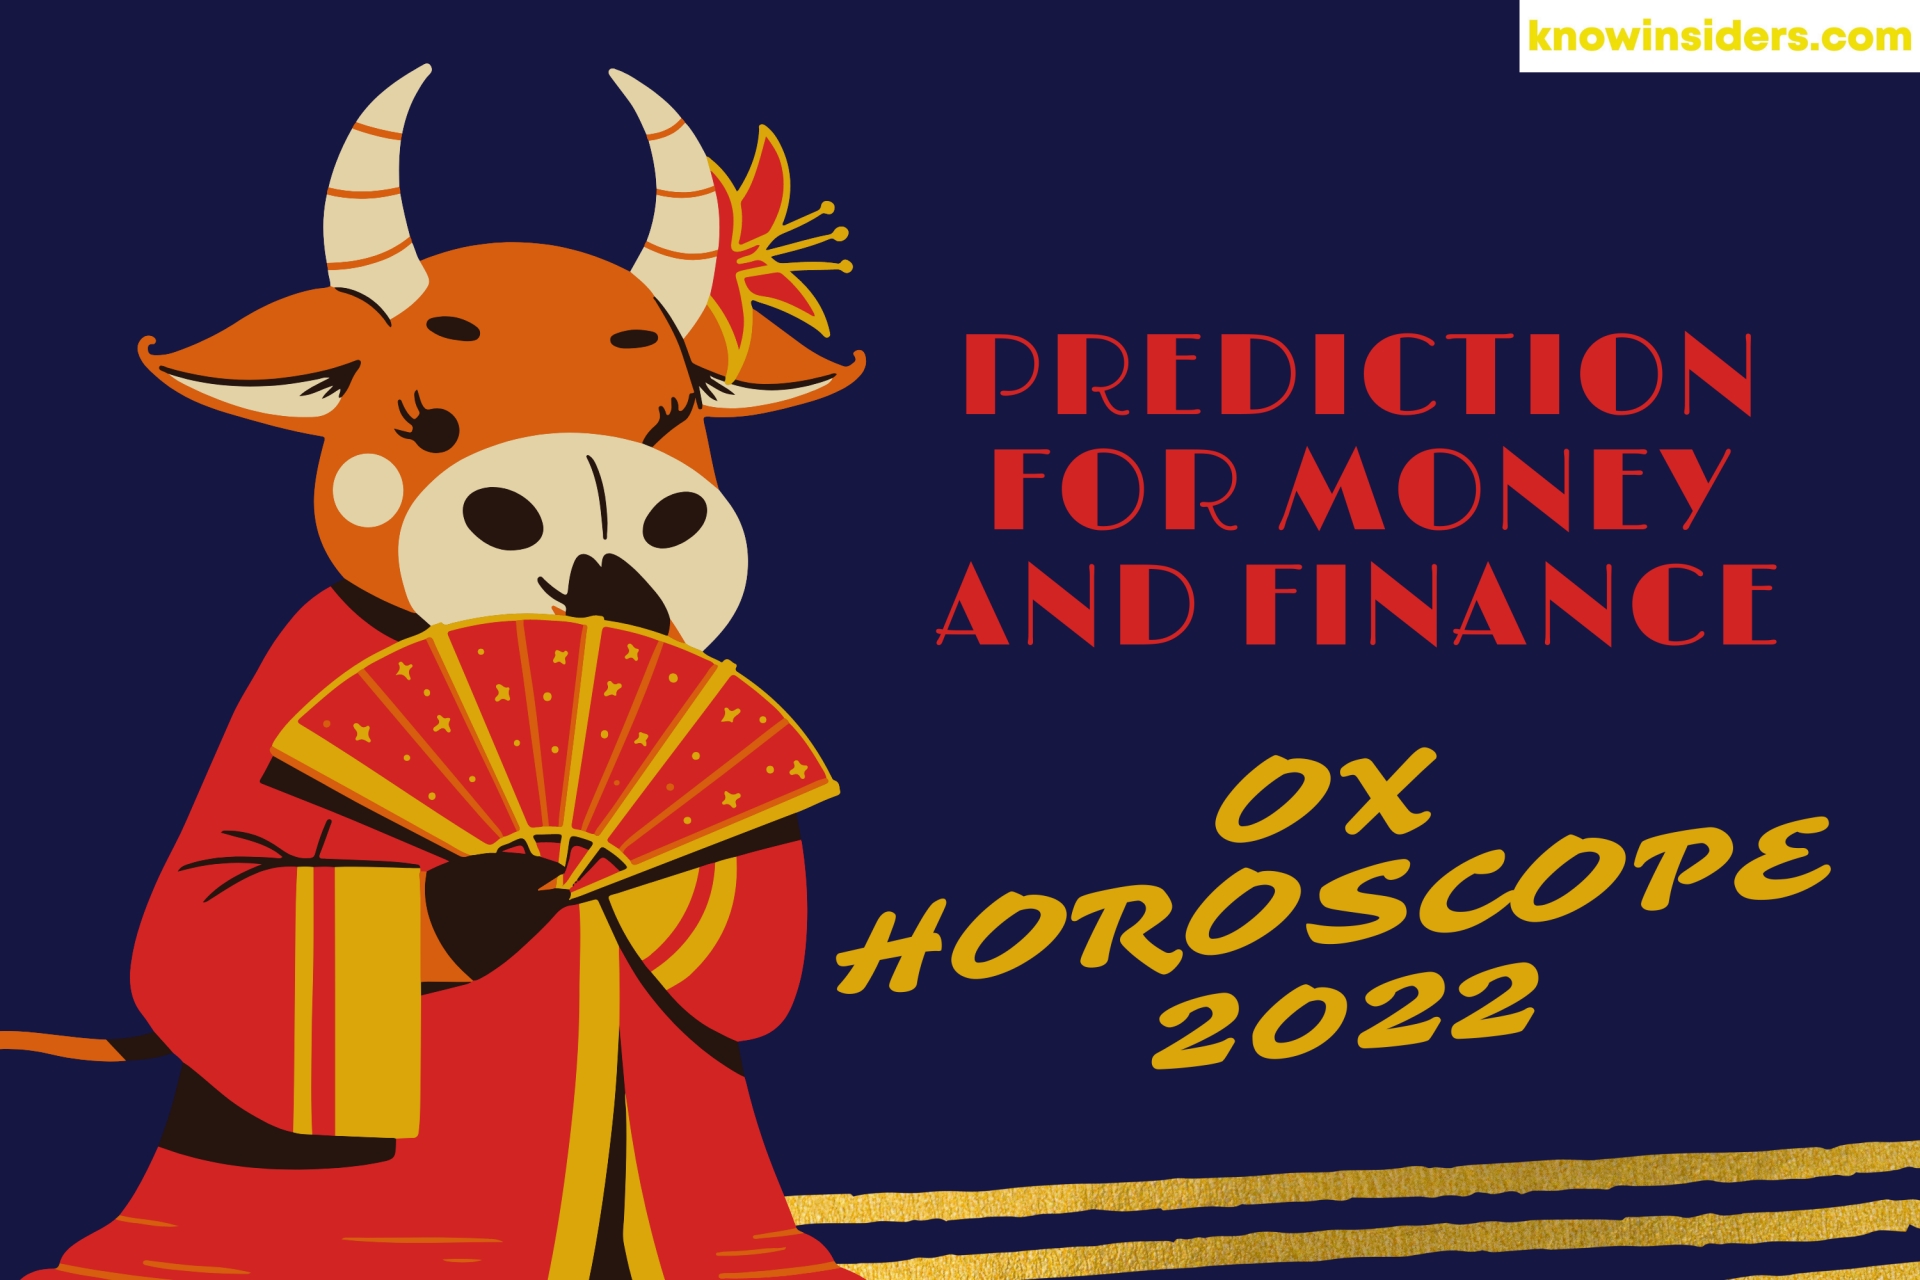 Ox Yearly Horoscope 2022 – Feng Shui Prediction for Money and Finance